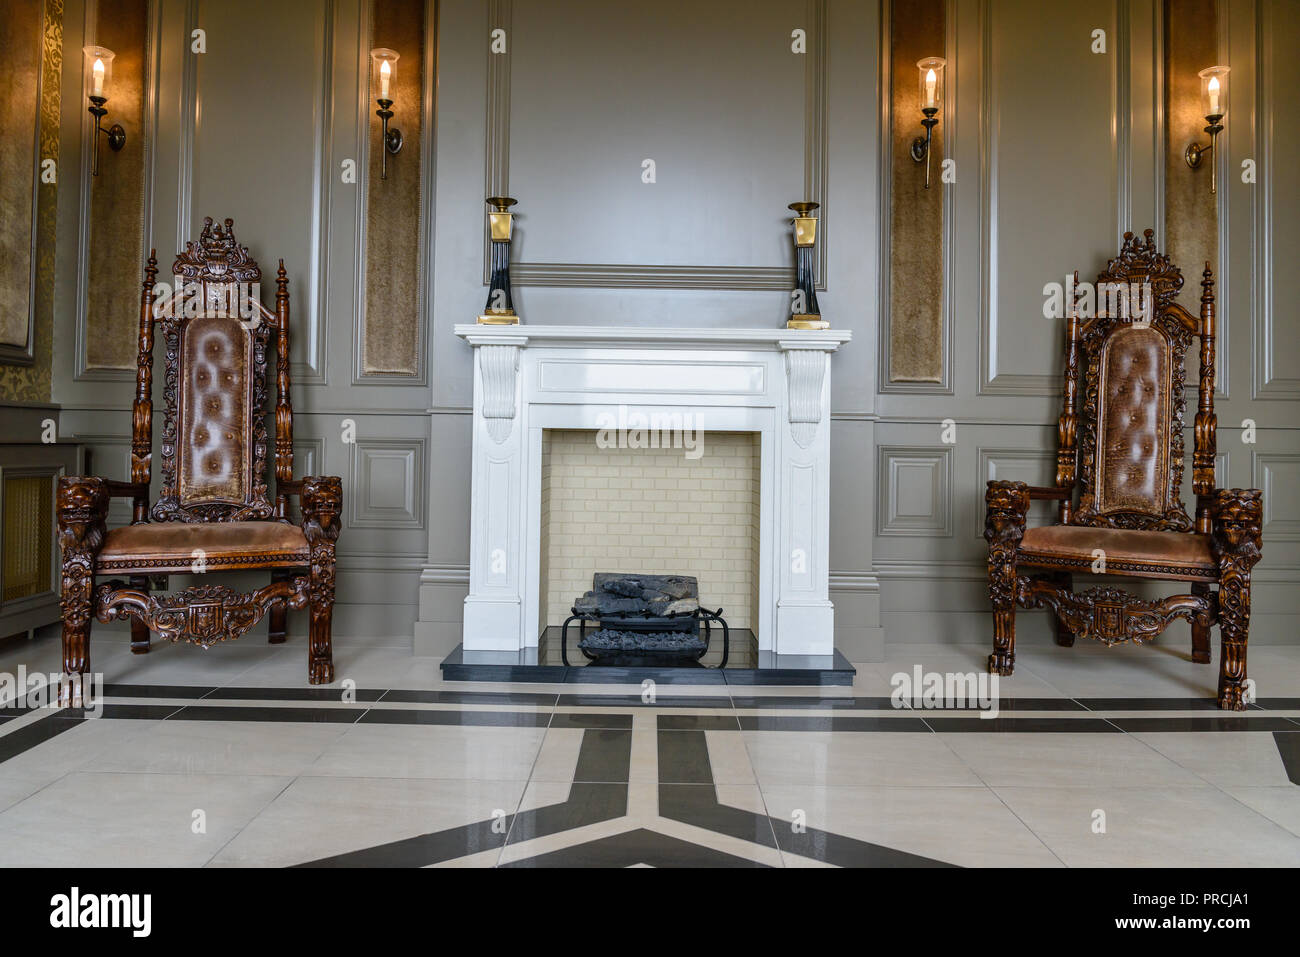 Fireplace and ornate wood and leather chairs in a stately home country house. Stock Photo